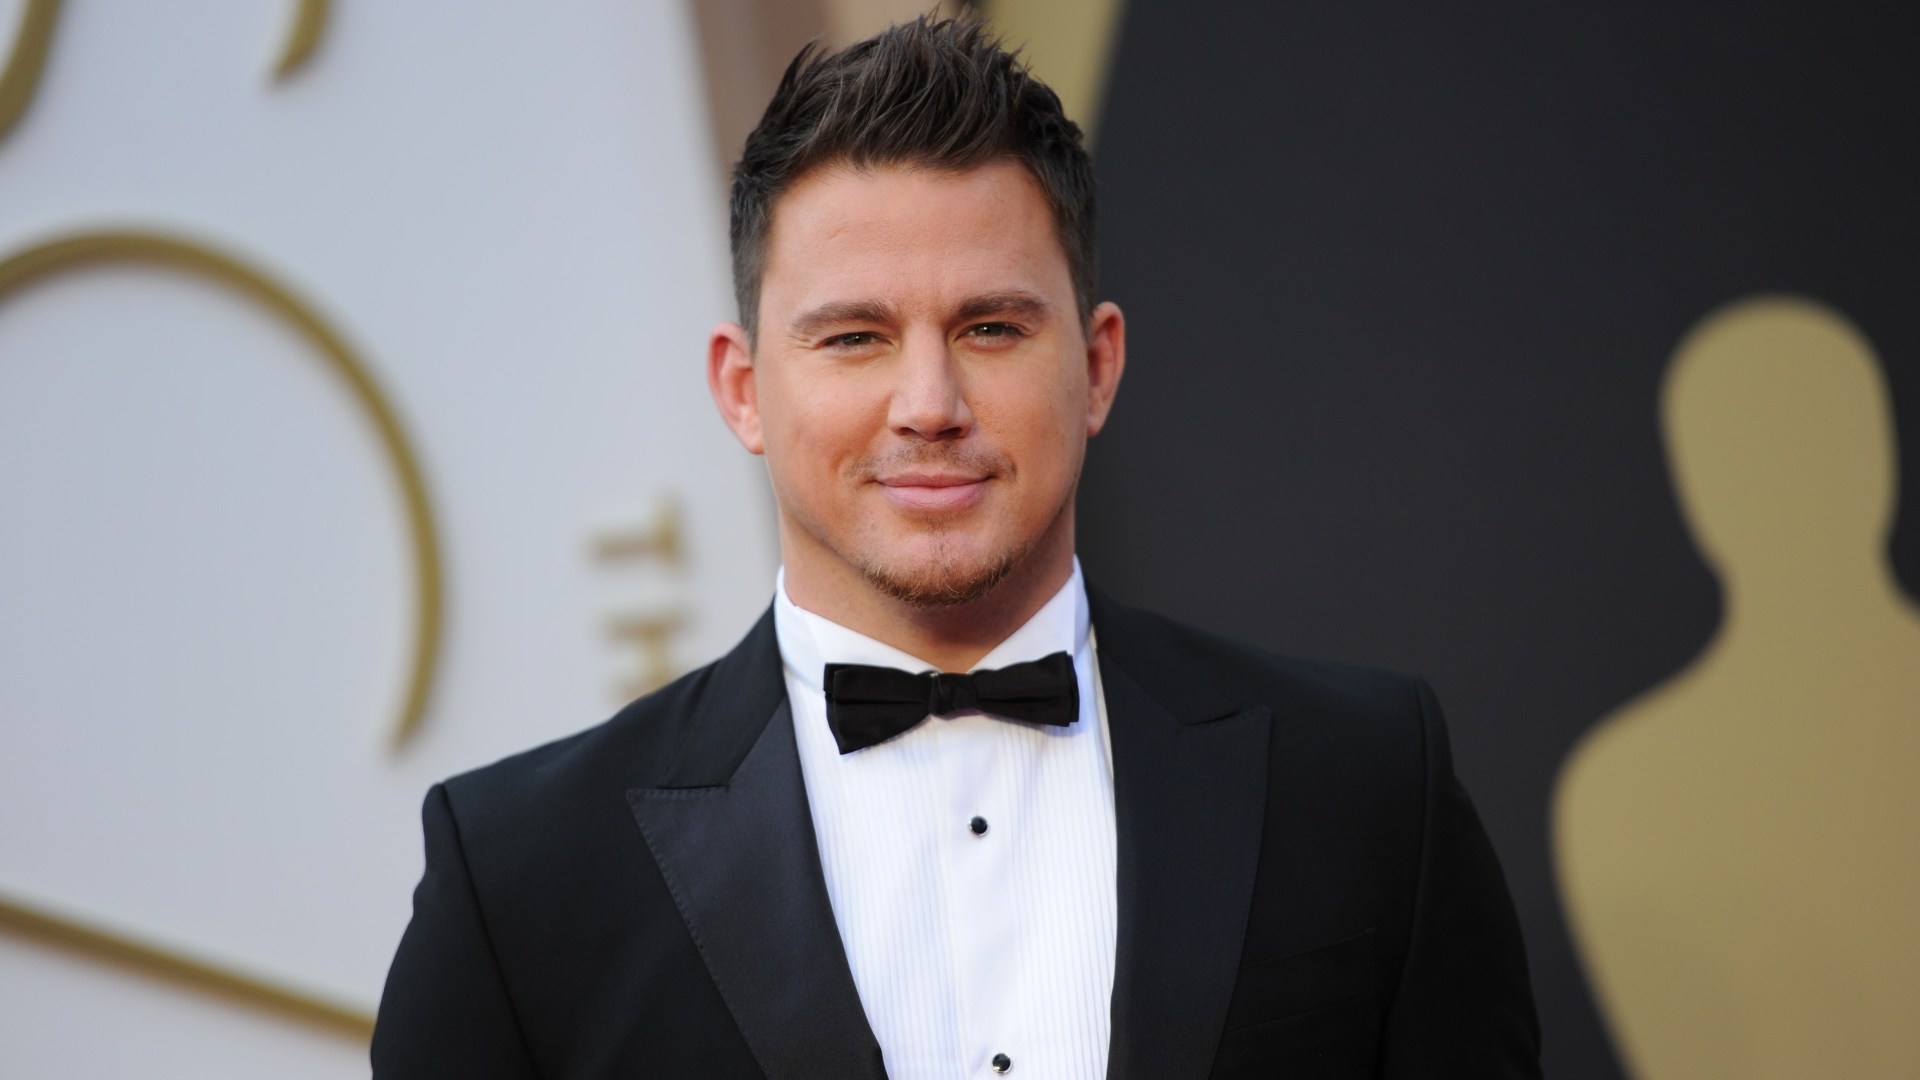 Channing Tatum Haircut Hollywood Hairstyles 2017 Actor Celebrity Best Sexiest 